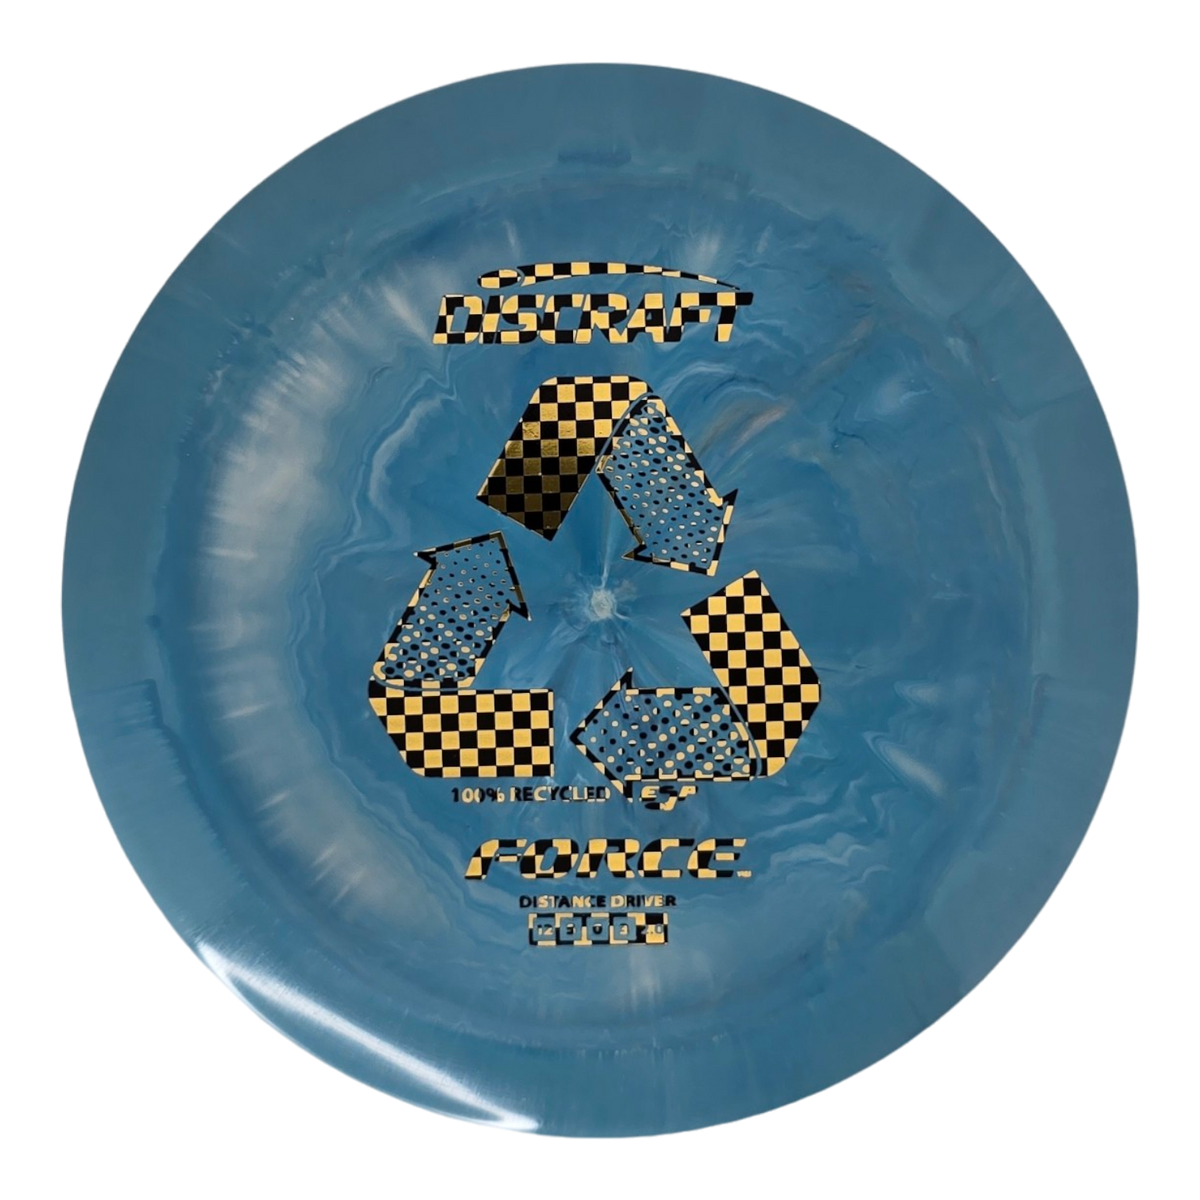 Discraft Recycled ESP Force